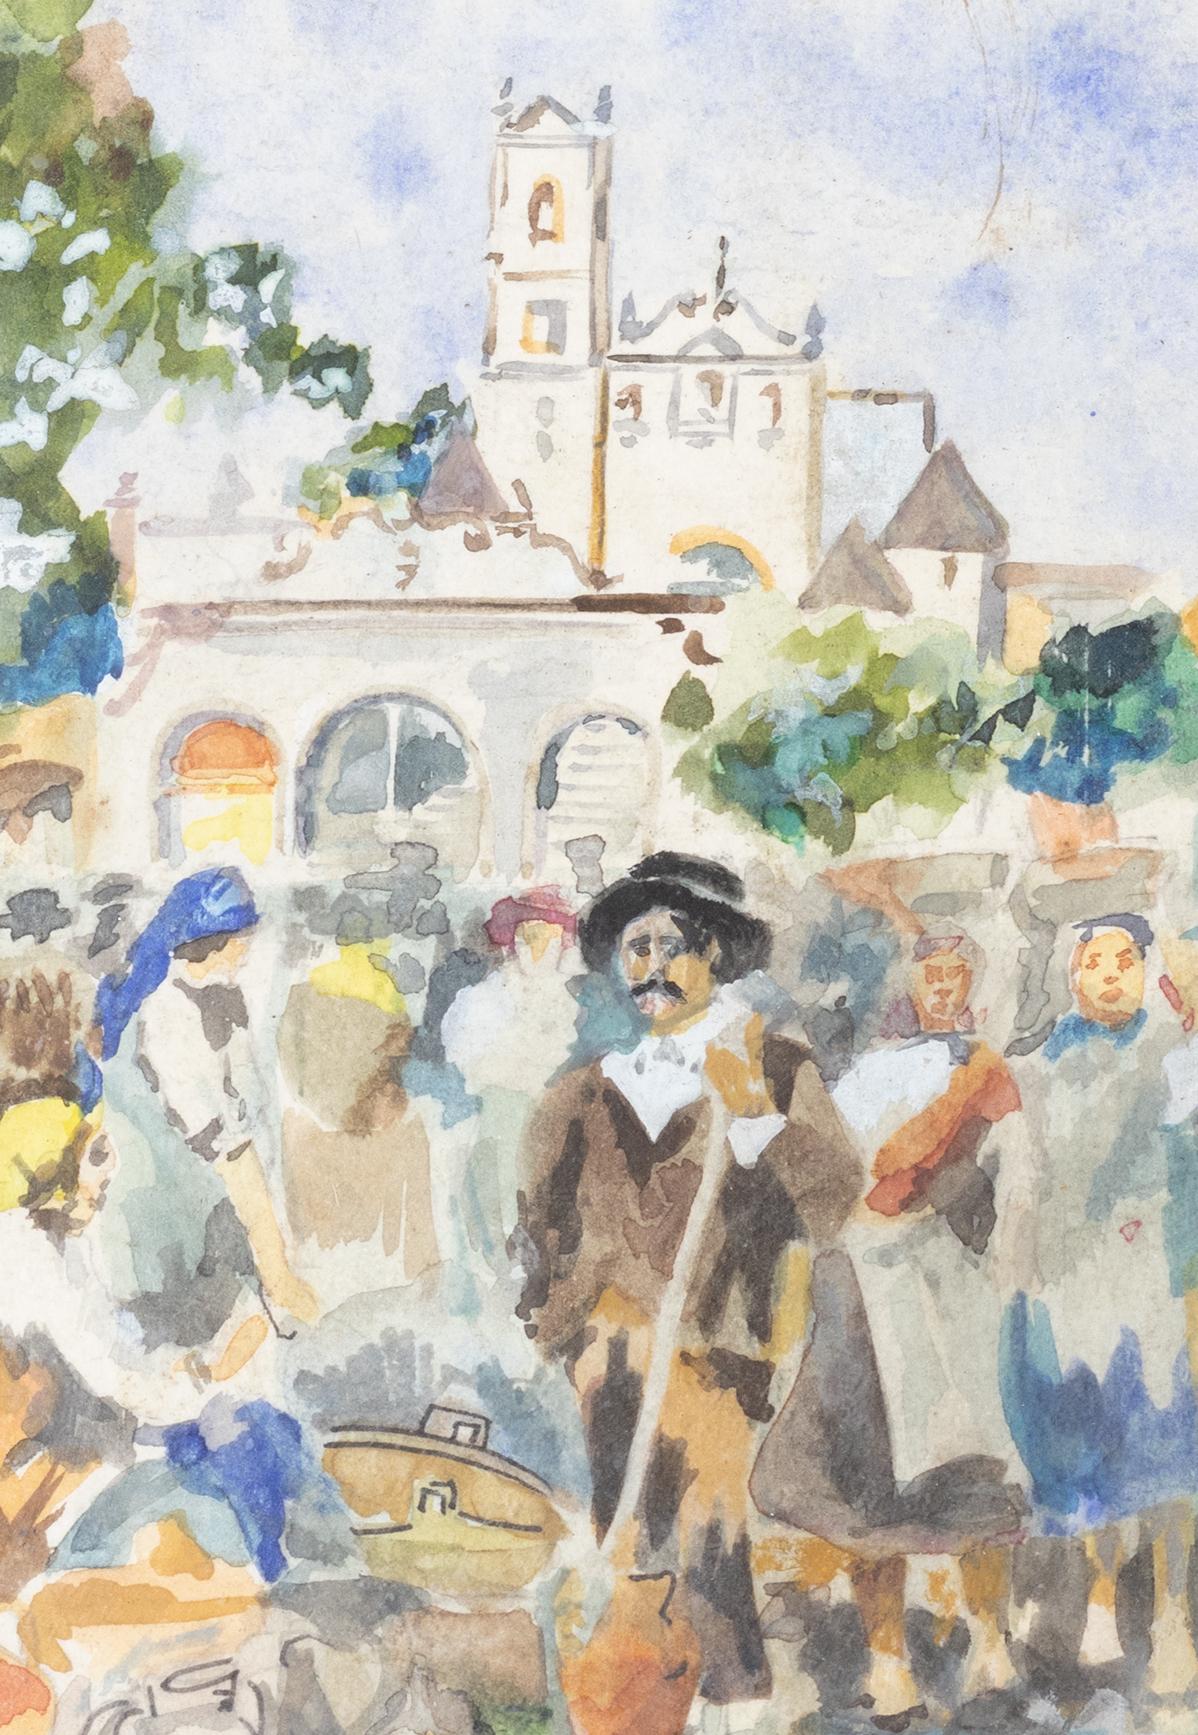 A watercolorist painting by Alfredo Januário de Moraes (1872 to 1971), a pioneer of portuguese comics and illustration, with a scene of a popular pilgrimage in the square of the Sanctuary / Church with figures in popular costumes and signed «Alfredo